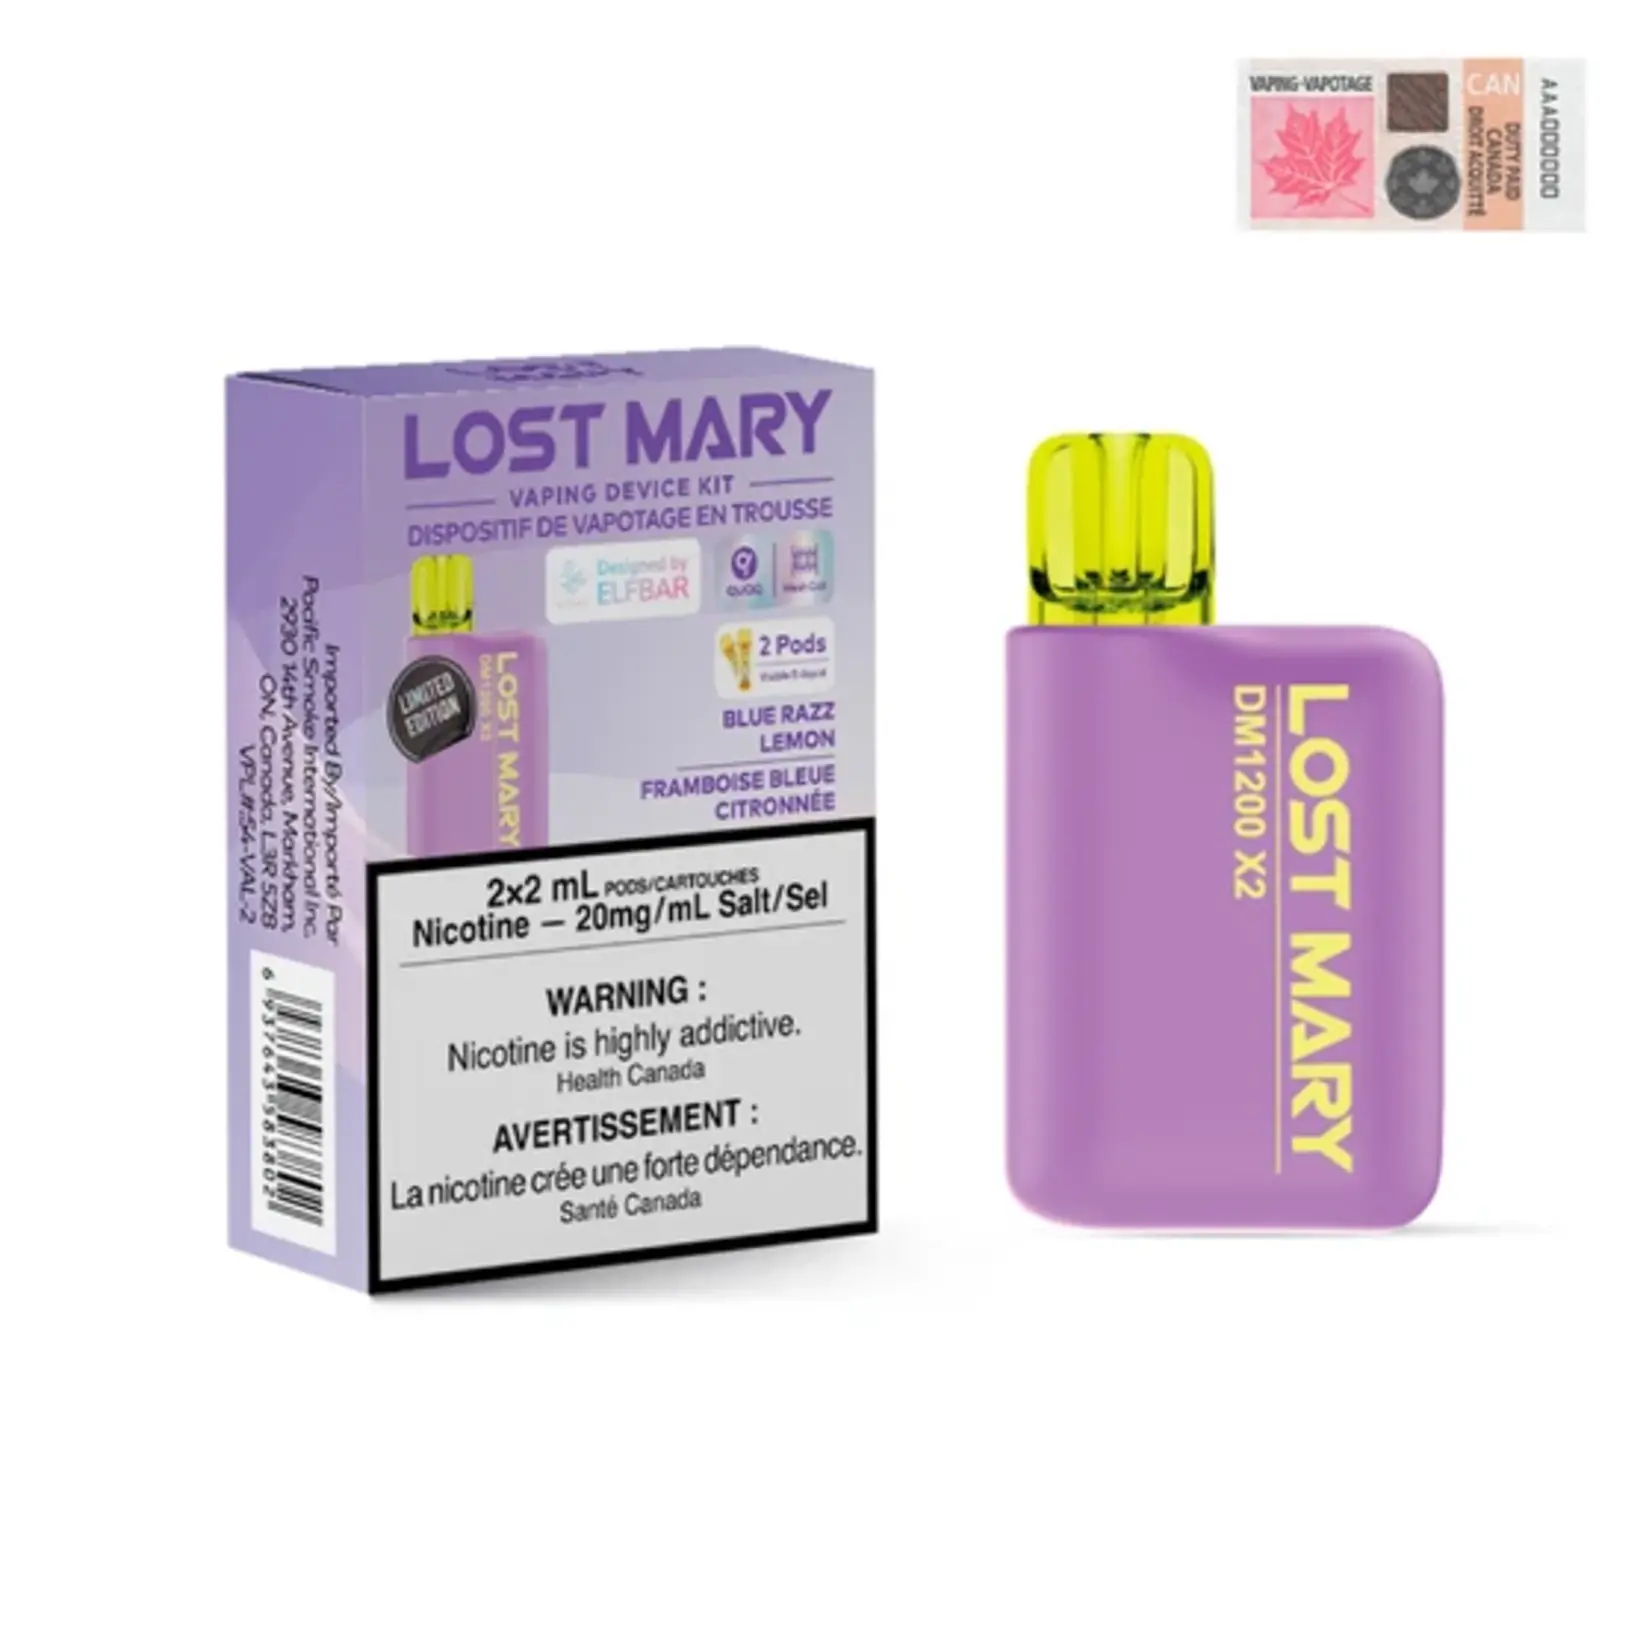 Lost Mary LOST MARY DM1200-